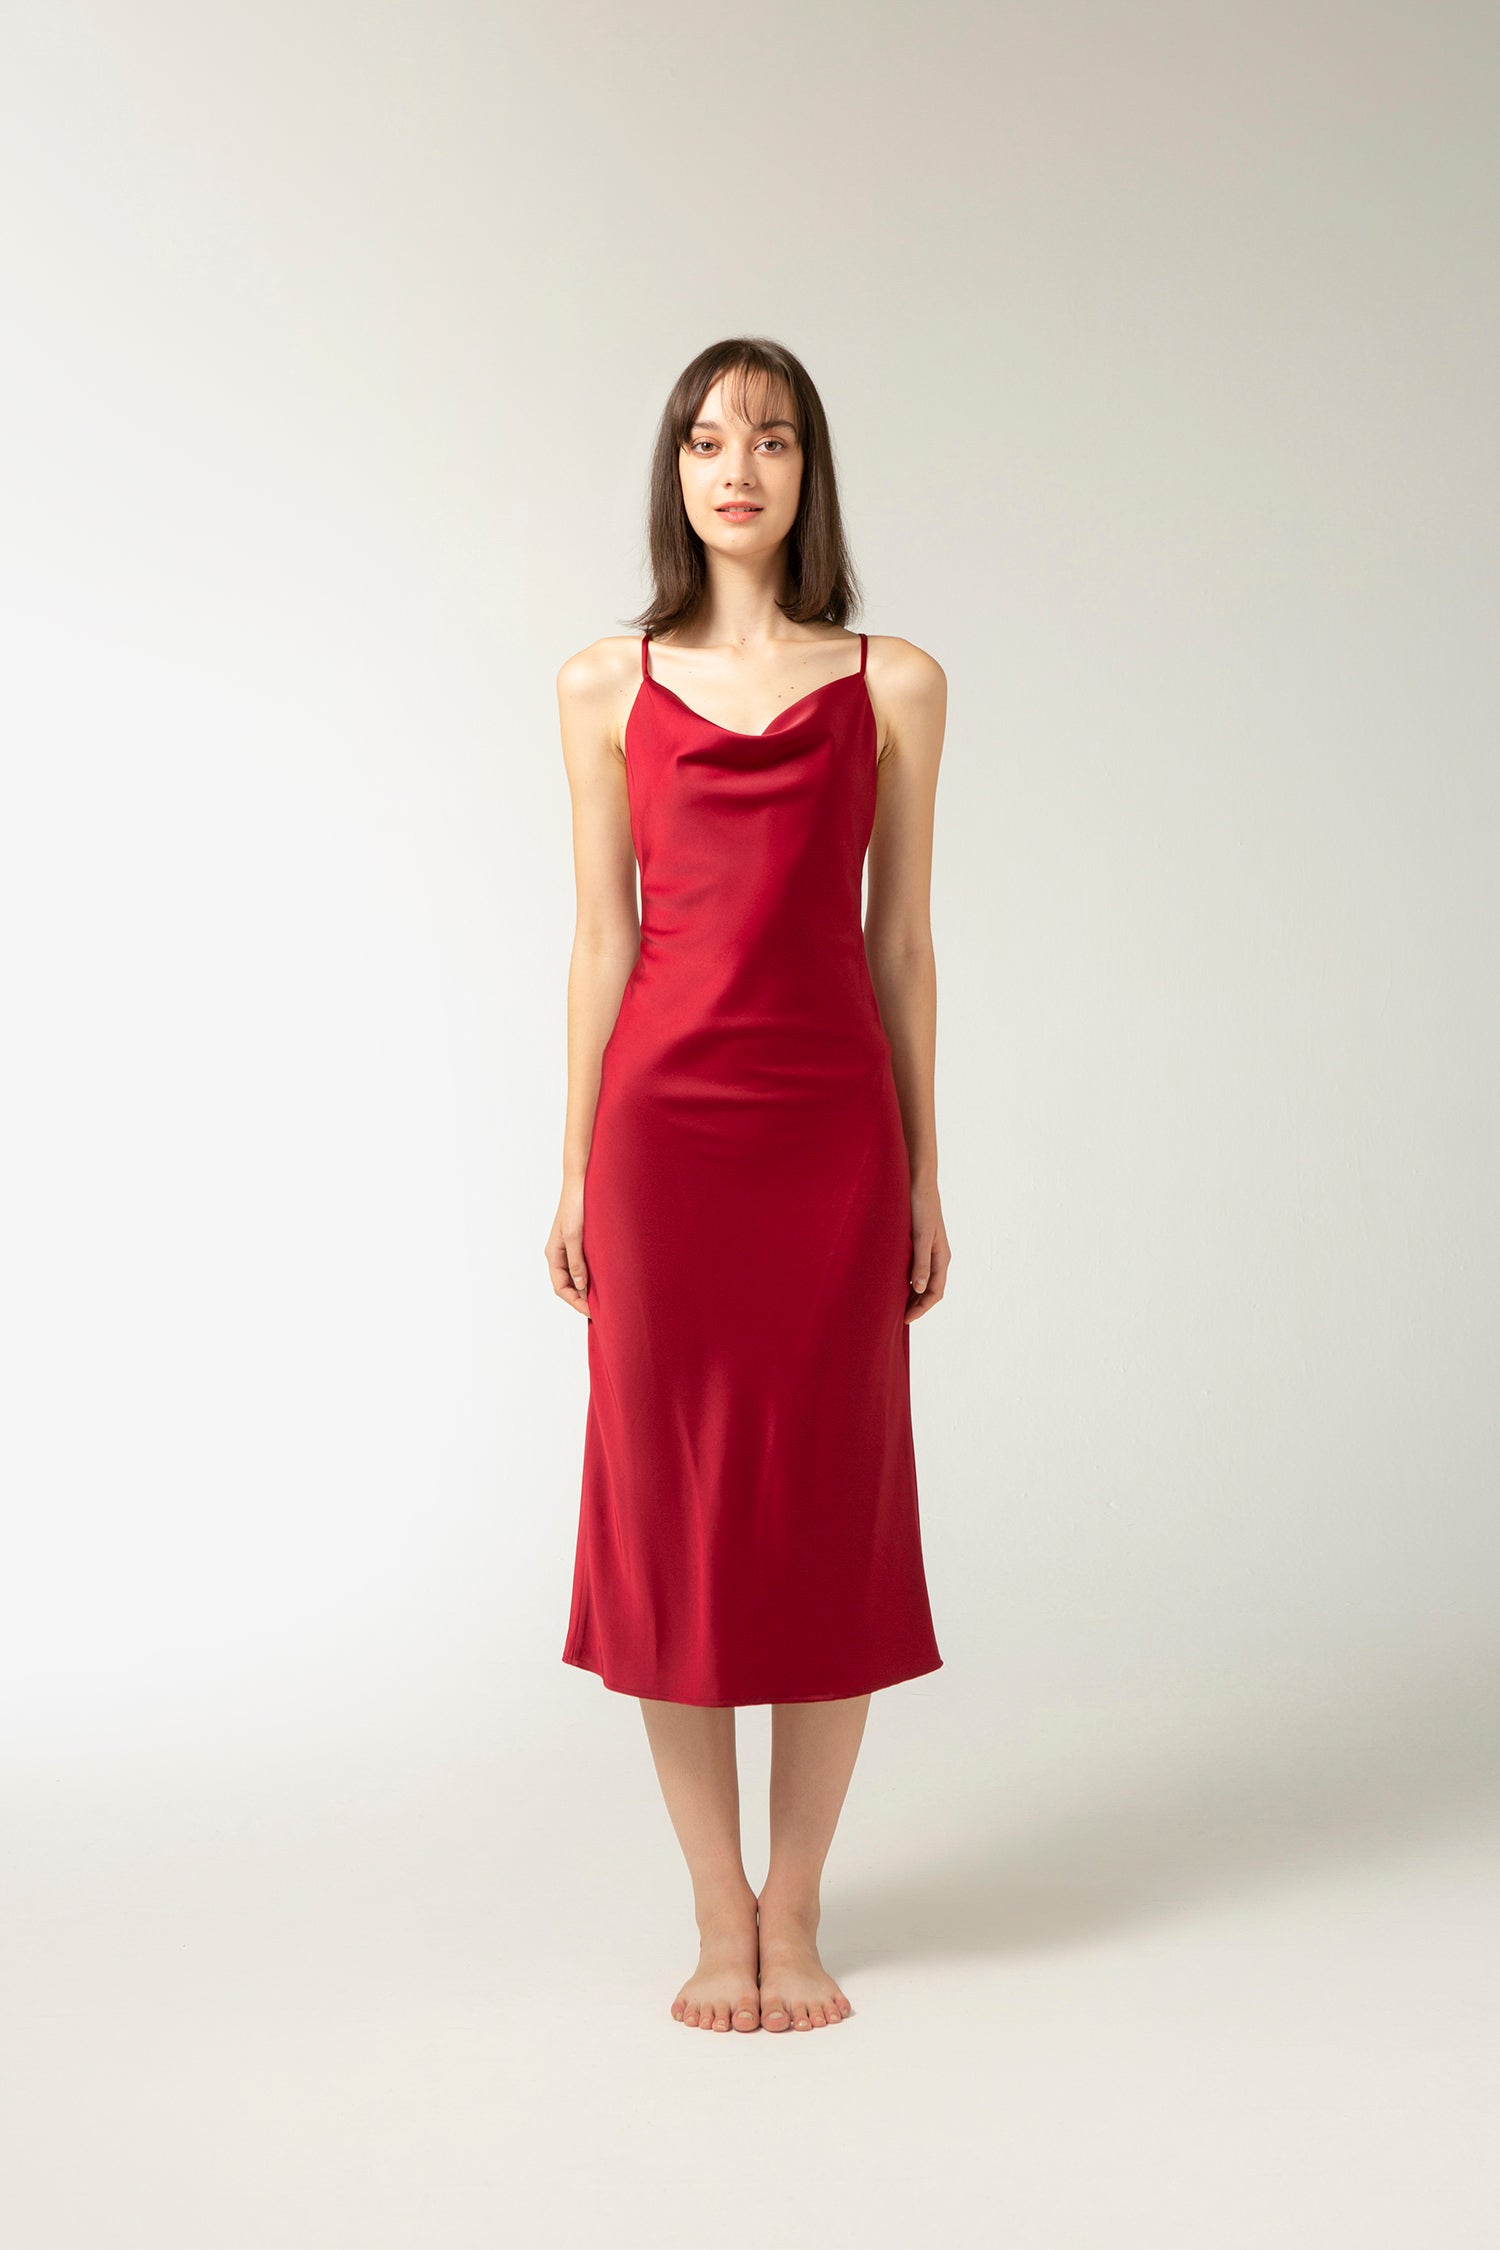 PAIGE Dress In Cherry  STORiES - STORiES Hong Kong